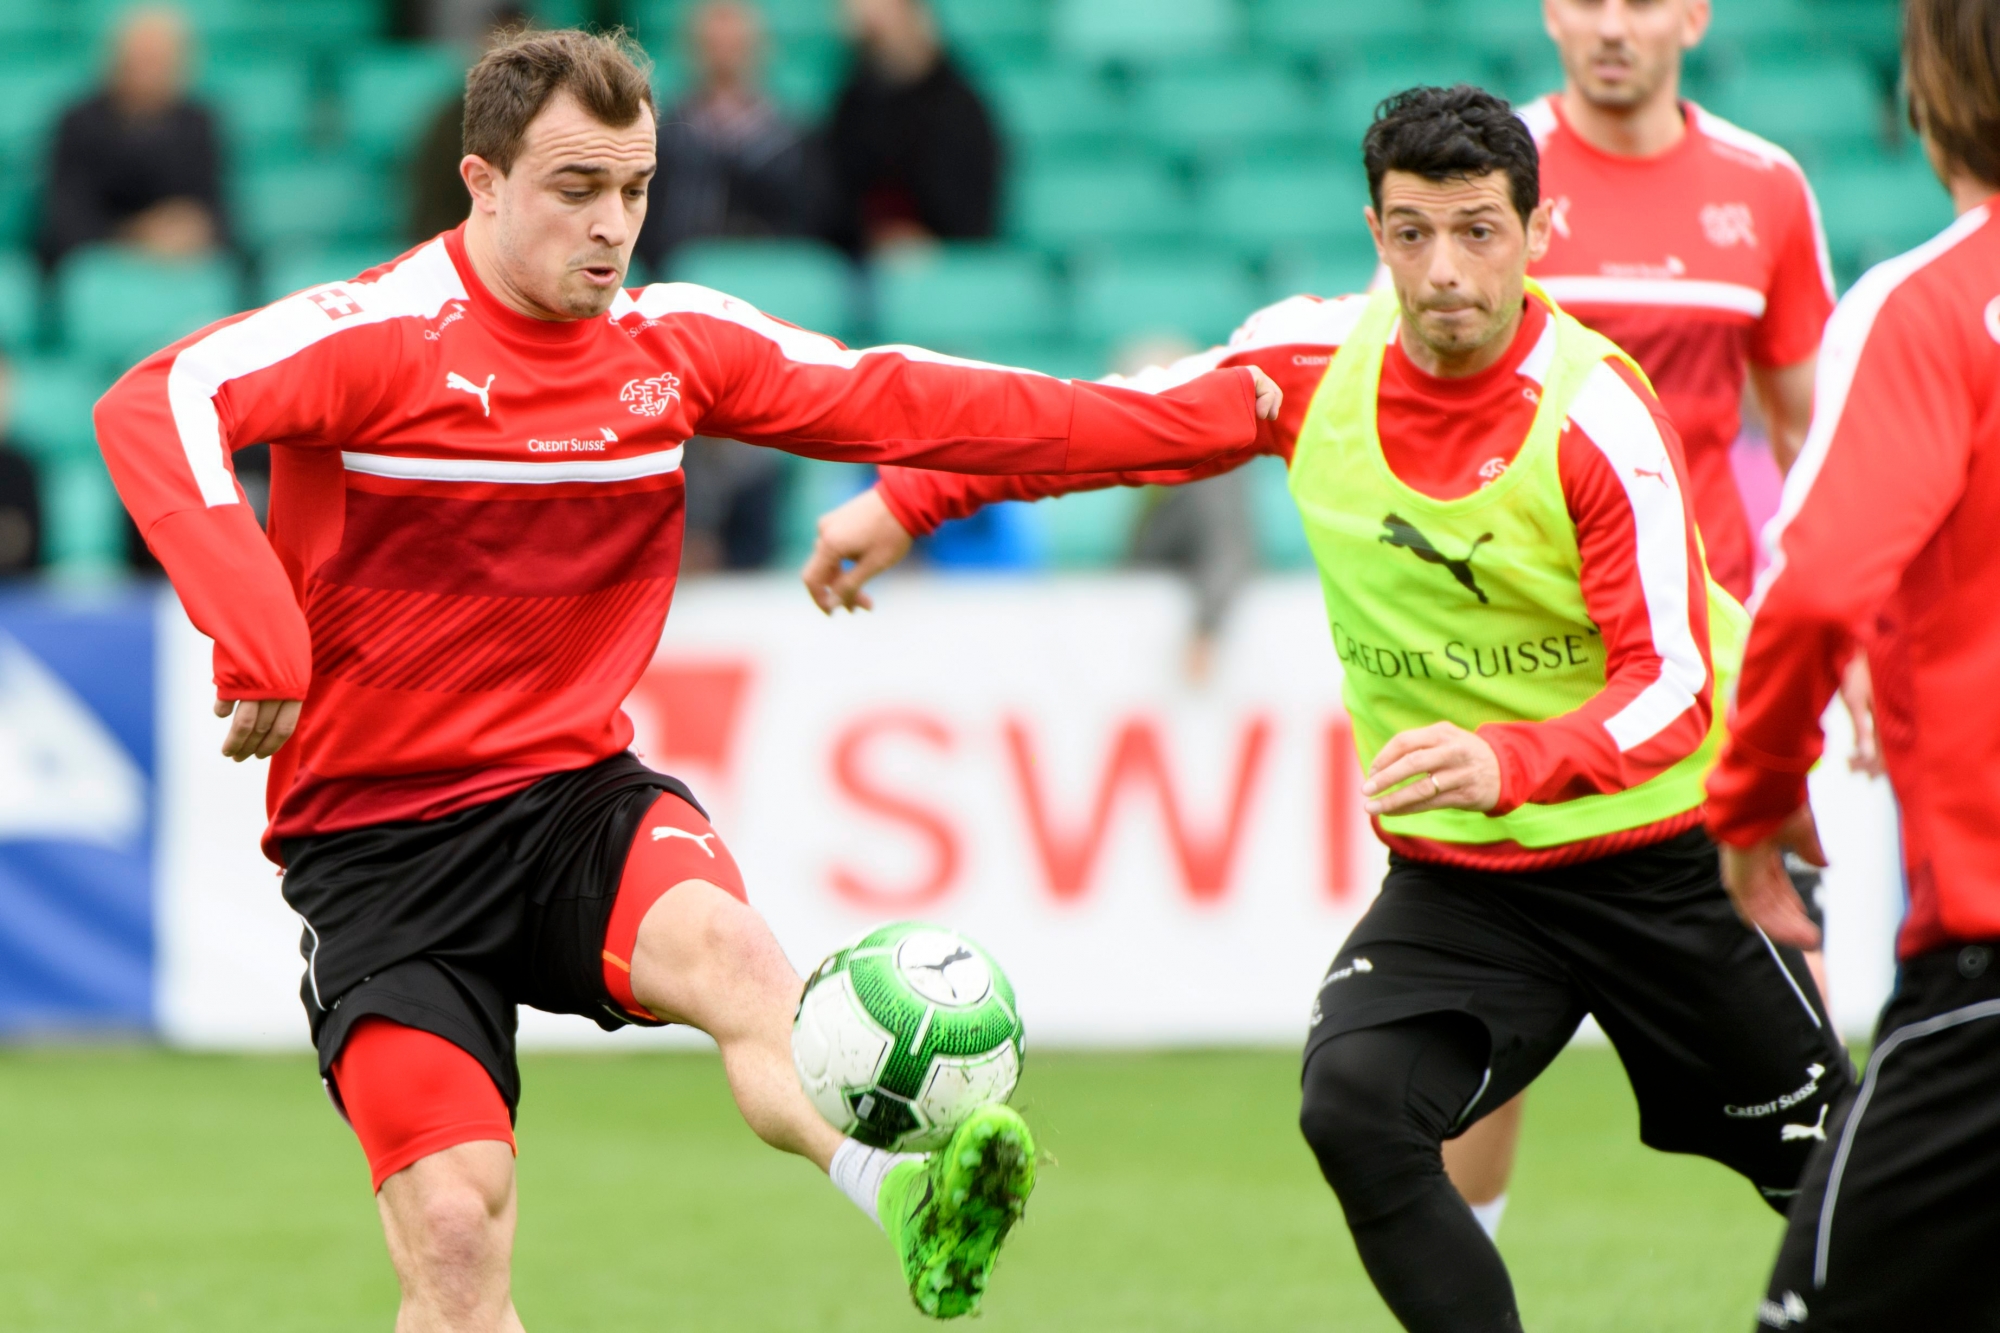 Swiss midfielder Blerim Dzemaili, right, fights for the ball against Swiss forward Xherdan Shaqiri, left, during a training session of the Switzerland soccer national team, at Juan-Antonio Samaranch stadium, in Lausanne, Switzerland, Tuesday, March 21, 2017. Switzerland will plays Latvia next saturday in Geneva for an 2018 Fifa World Cup group B qualification soccer match. (KEYSTONE/Laurent Gillieron) SWITZERLAND SOCCER TRAINING SWISS TEAM